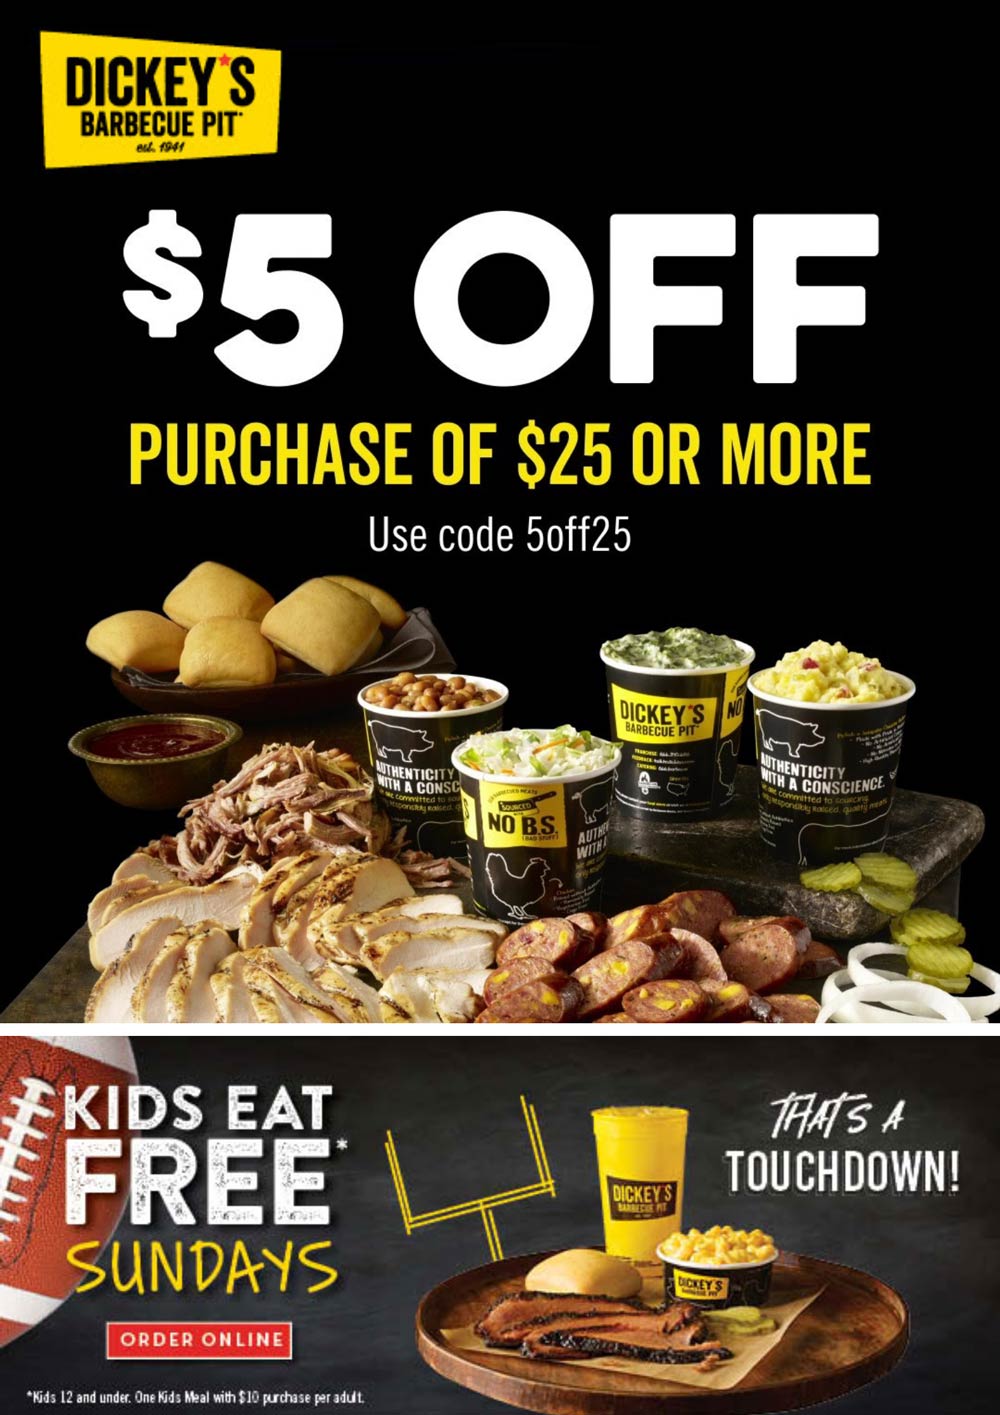 Dickeys Barbecue Pit stores Coupon  $5 off $25 + kids free Sundays at Dickeys Barbecue Pit via promo code 5off25 #dickeysbarbecuepit 